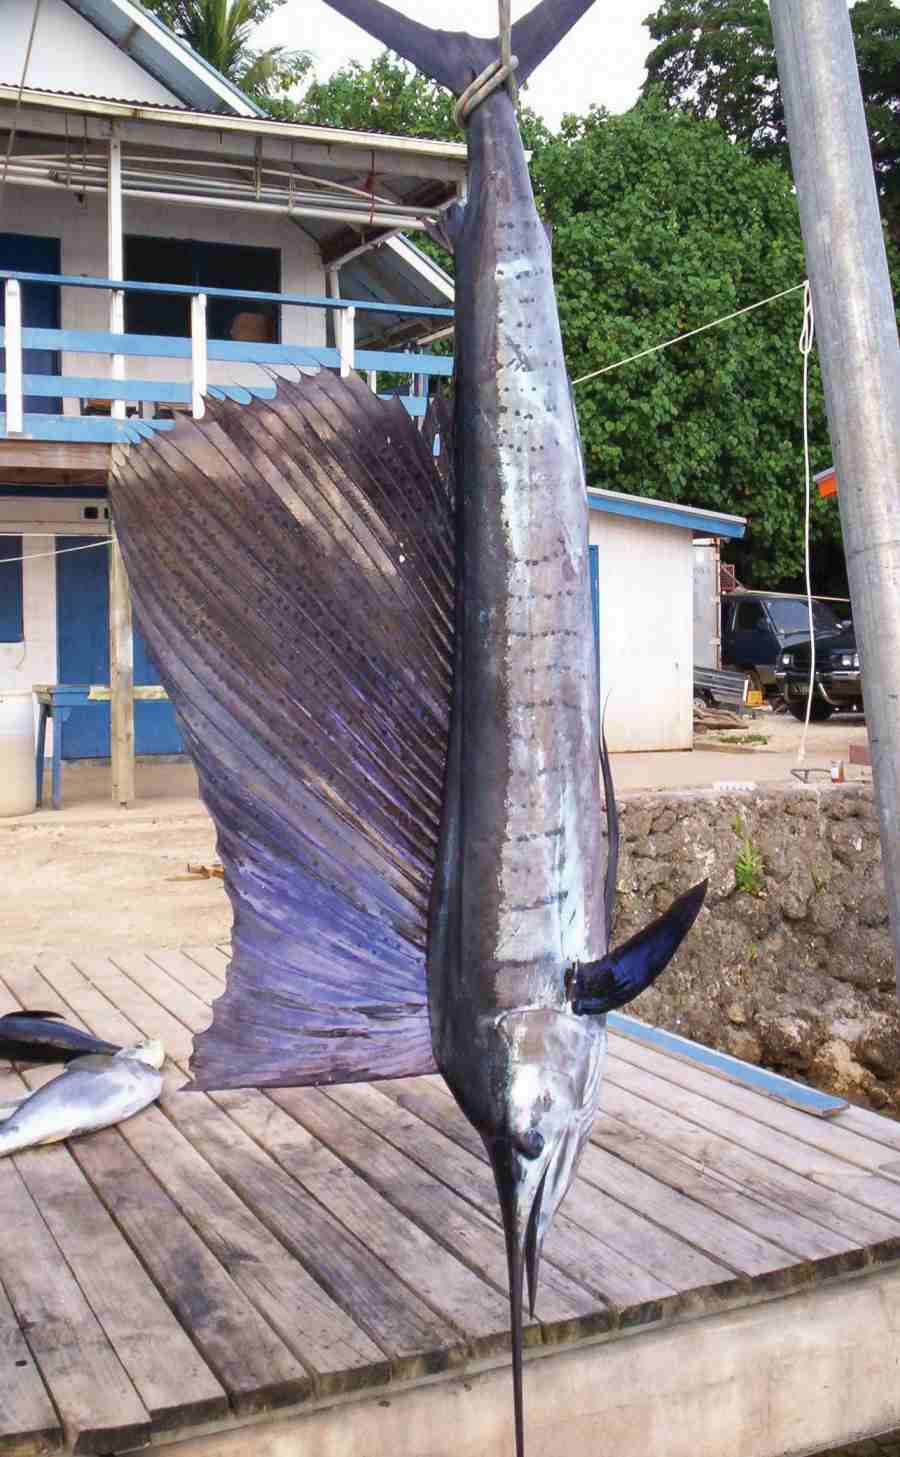 What Types of Fish Can You Fish for in Tonga?